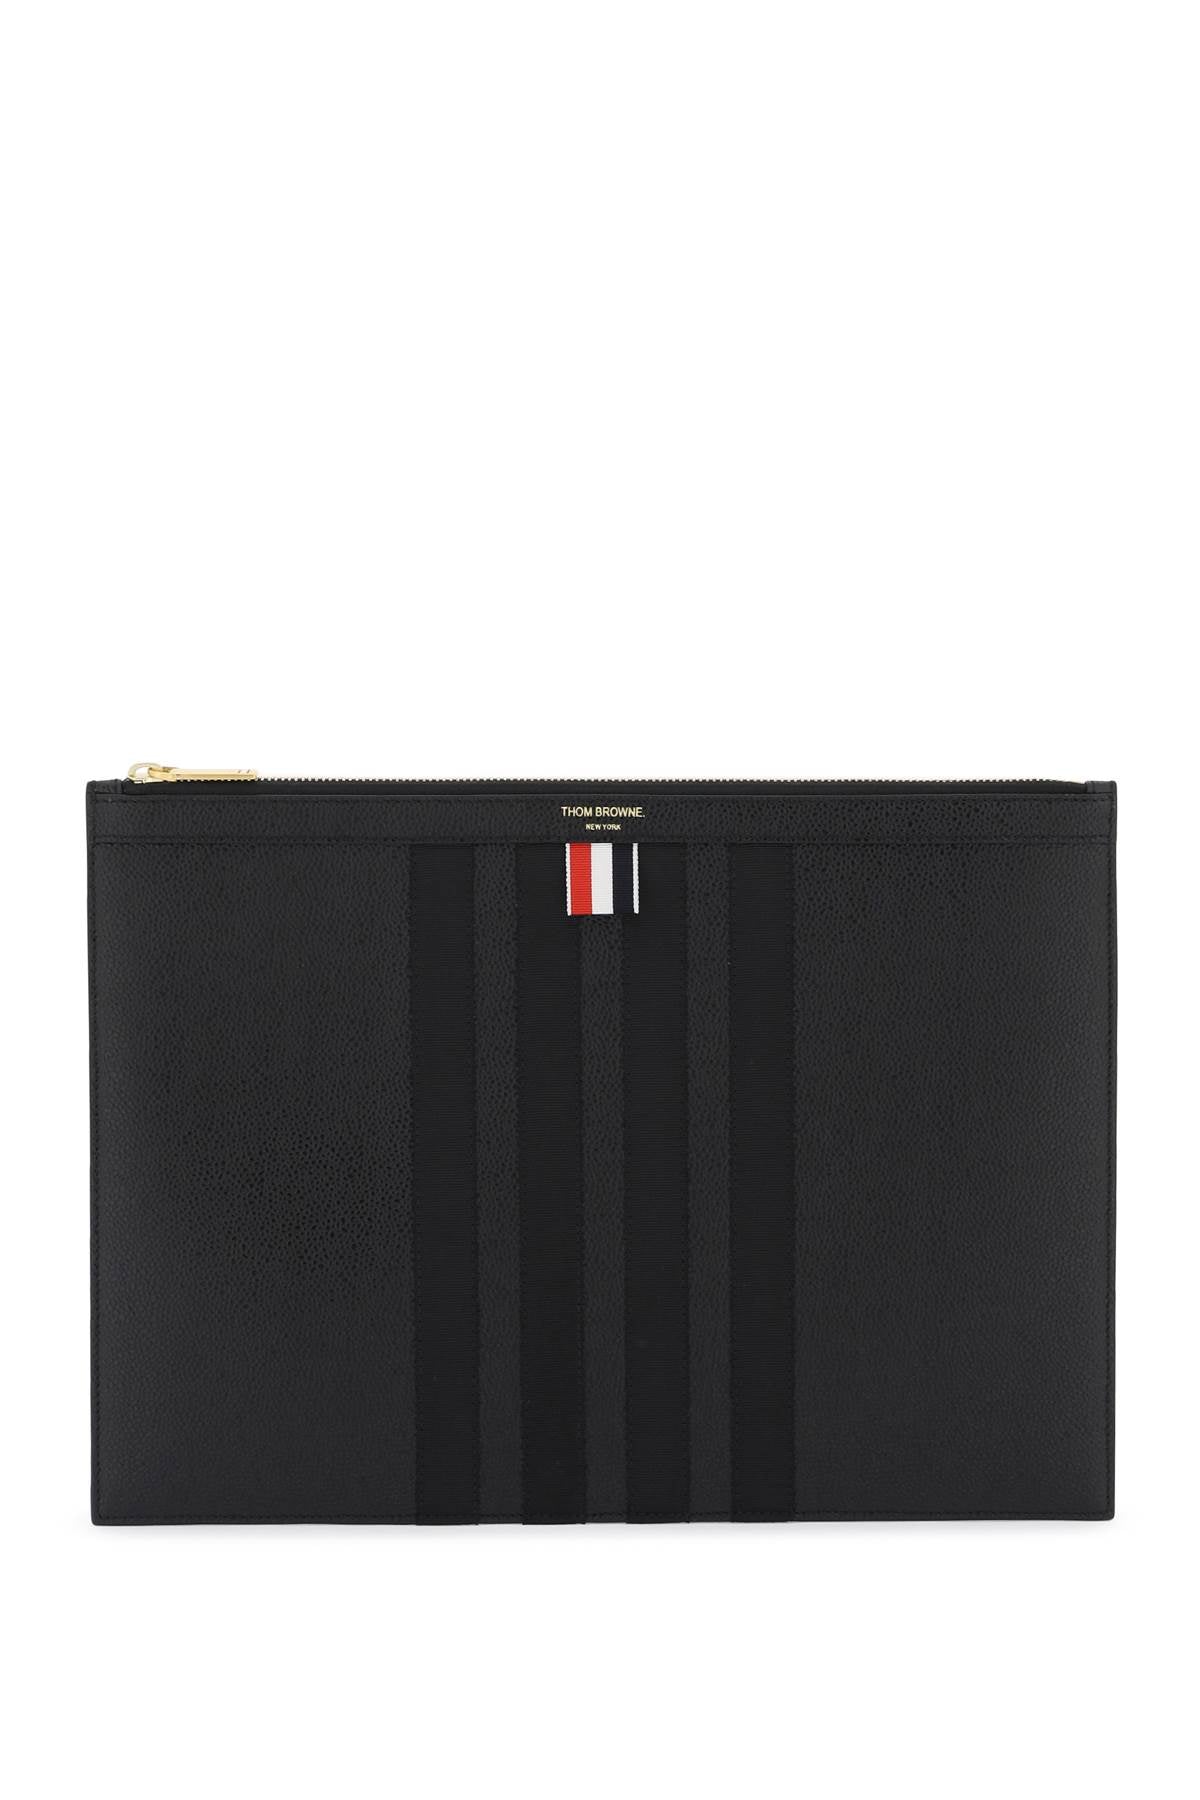 THOM BROWNE Men's Pebbled Leather Medium Document Holder in Black with Tricolor Stripes